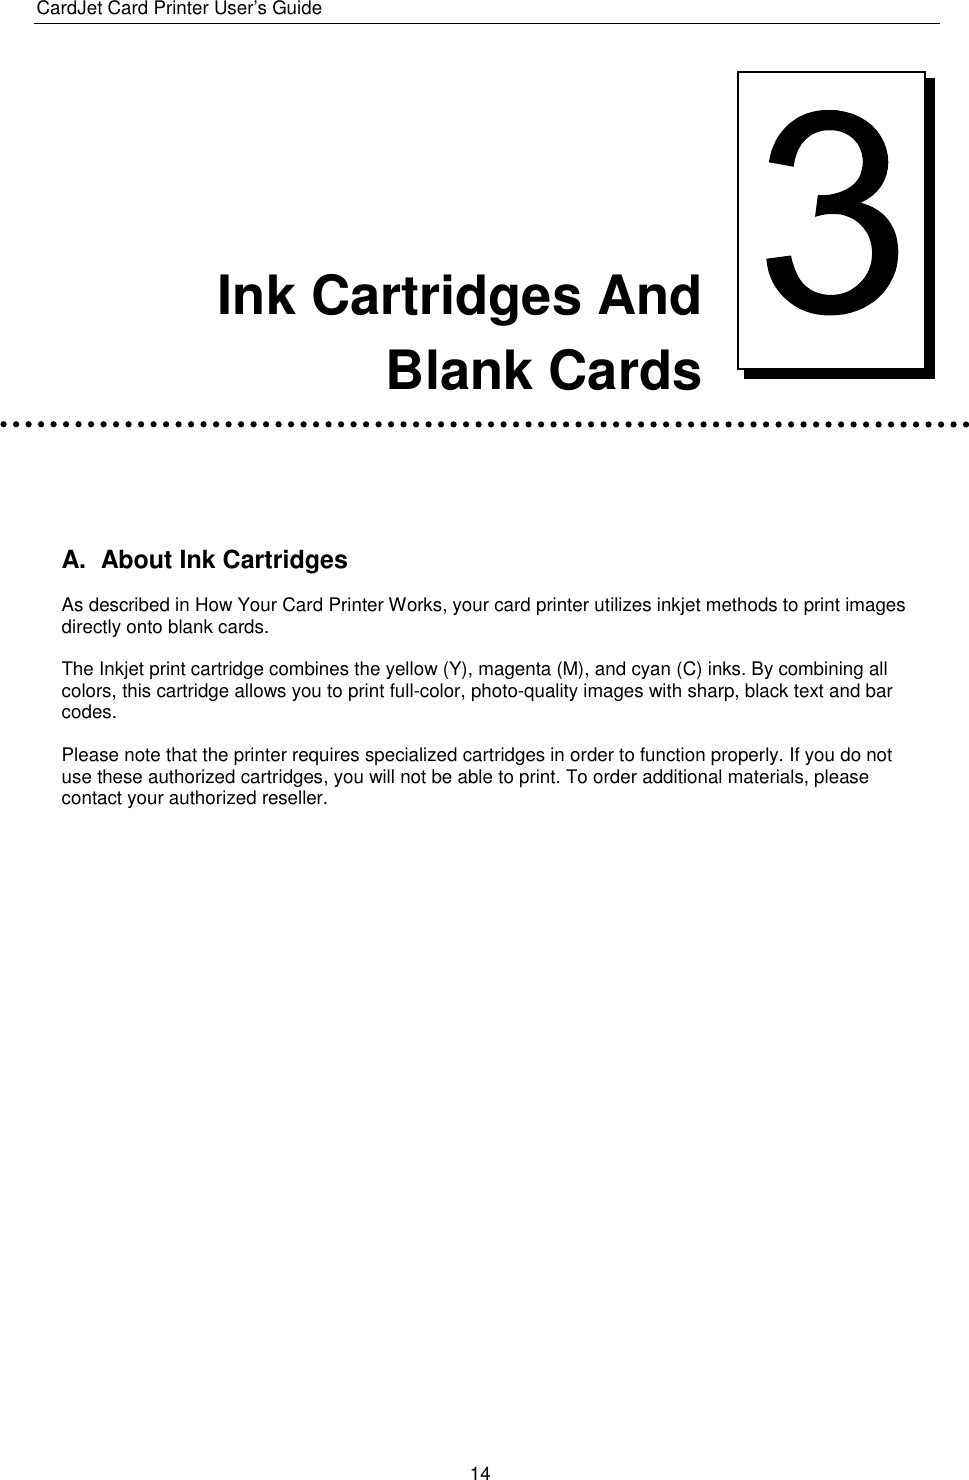 CardJet Card Printer User’s Guide  14      Ink Cartridges And  Blank Cards   A.  About Ink Cartridges As described in How Your Card Printer Works, your card printer utilizes inkjet methods to print images directly onto blank cards.  The Inkjet print cartridge combines the yellow (Y), magenta (M), and cyan (C) inks. By combining all colors, this cartridge allows you to print full-color, photo-quality images with sharp, black text and bar codes.  Please note that the printer requires specialized cartridges in order to function properly. If you do not use these authorized cartridges, you will not be able to print. To order additional materials, please contact your authorized reseller.    